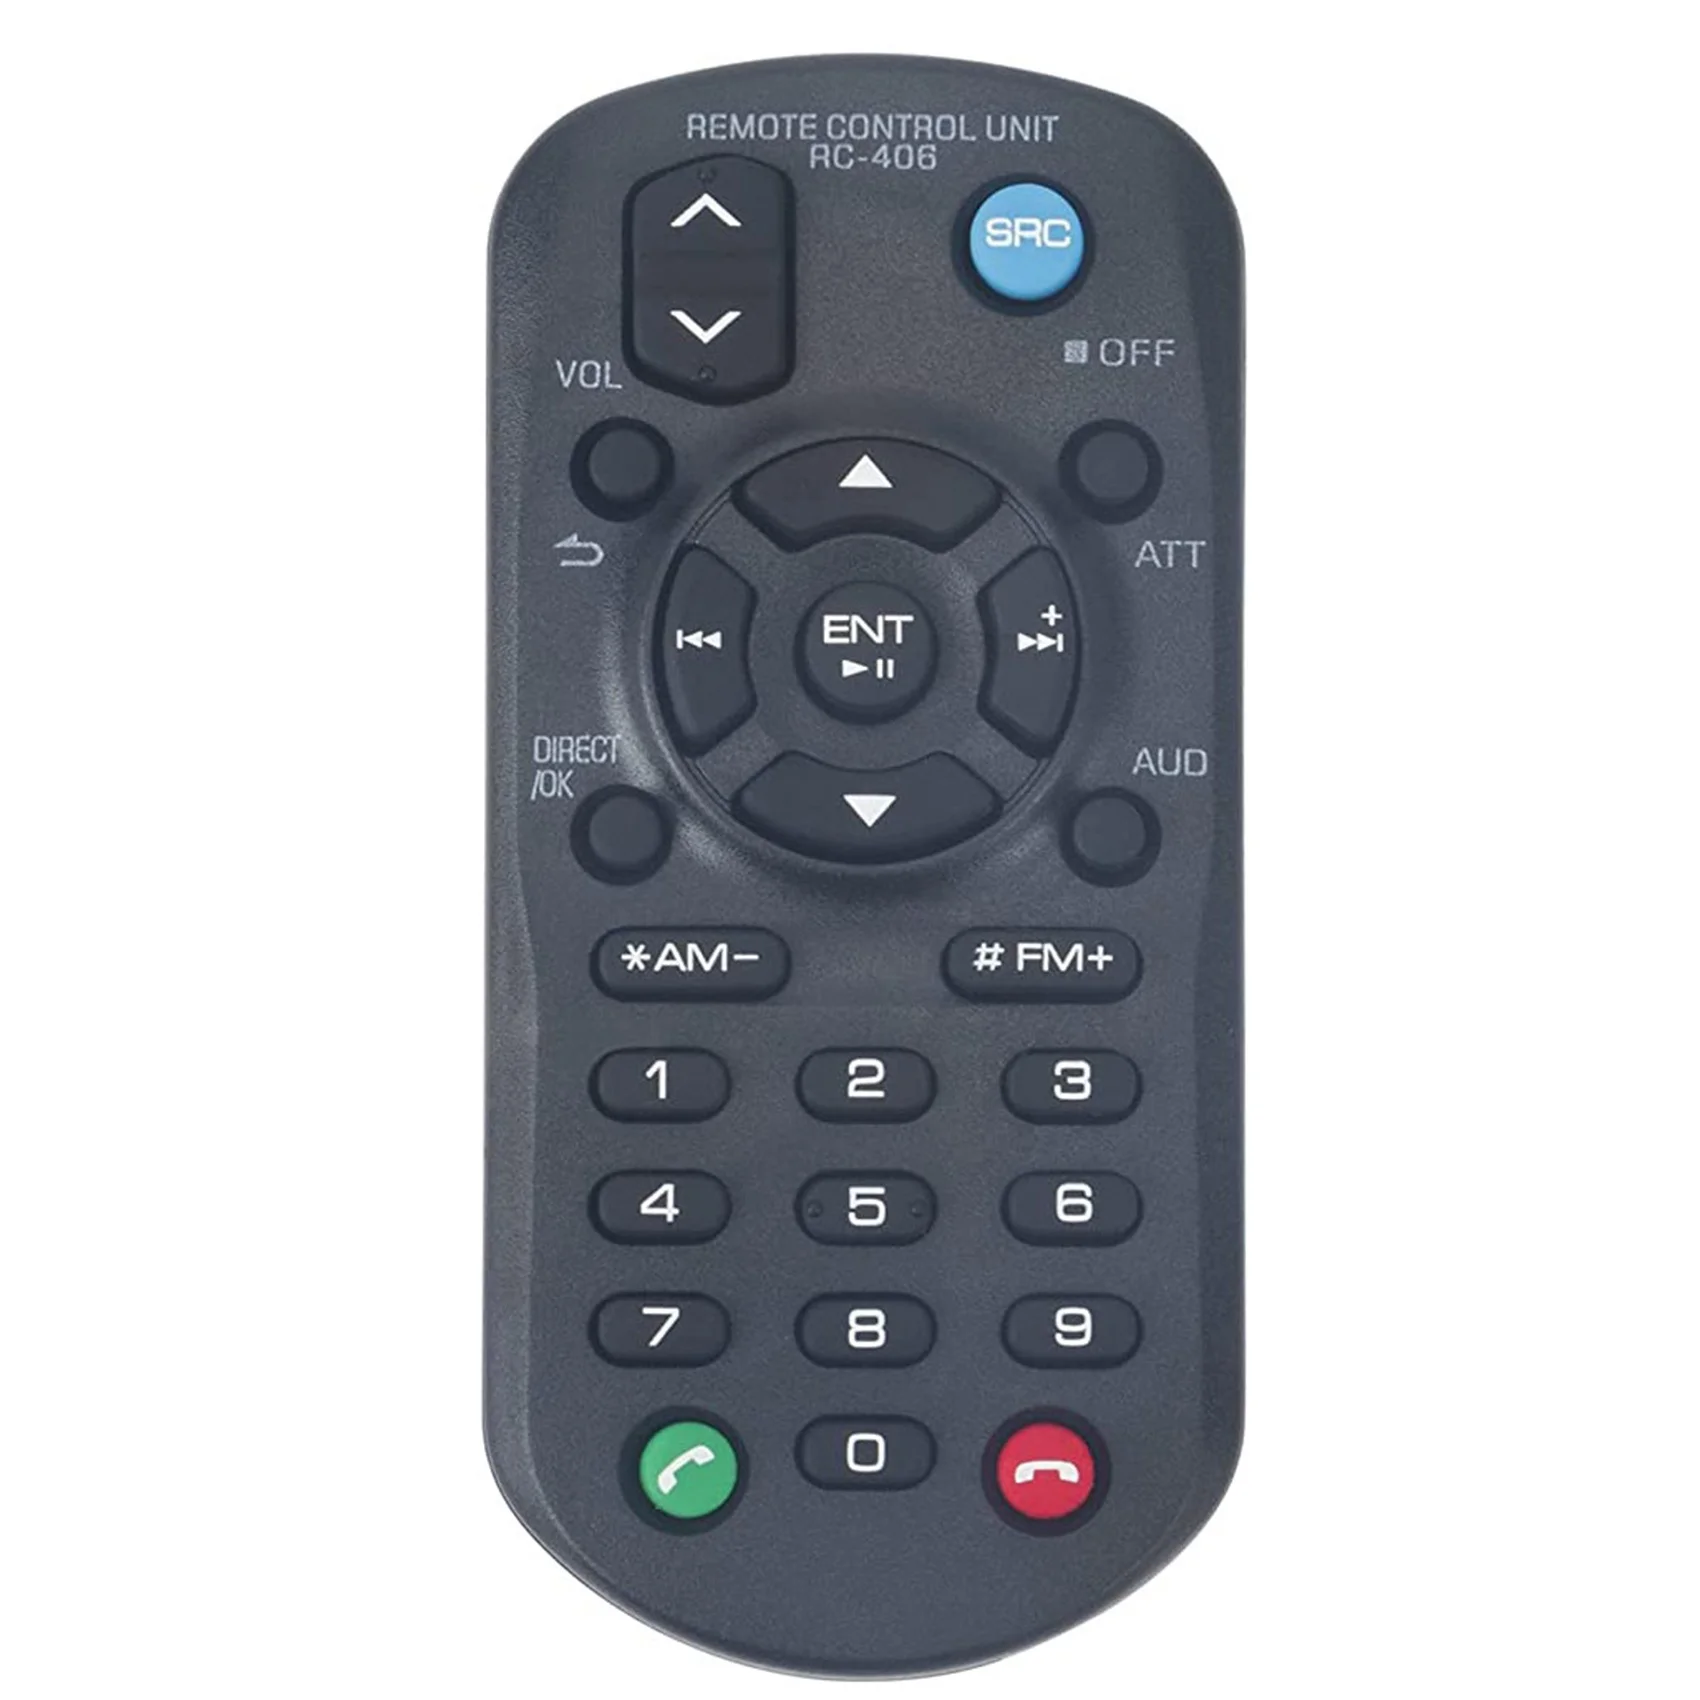 

RC-406 Replacement Remote Control for Kenwood CD Receiver DPX503BT KMM-BT328 DPX524BT KMM-BT228U DPX504BT DPX593BT